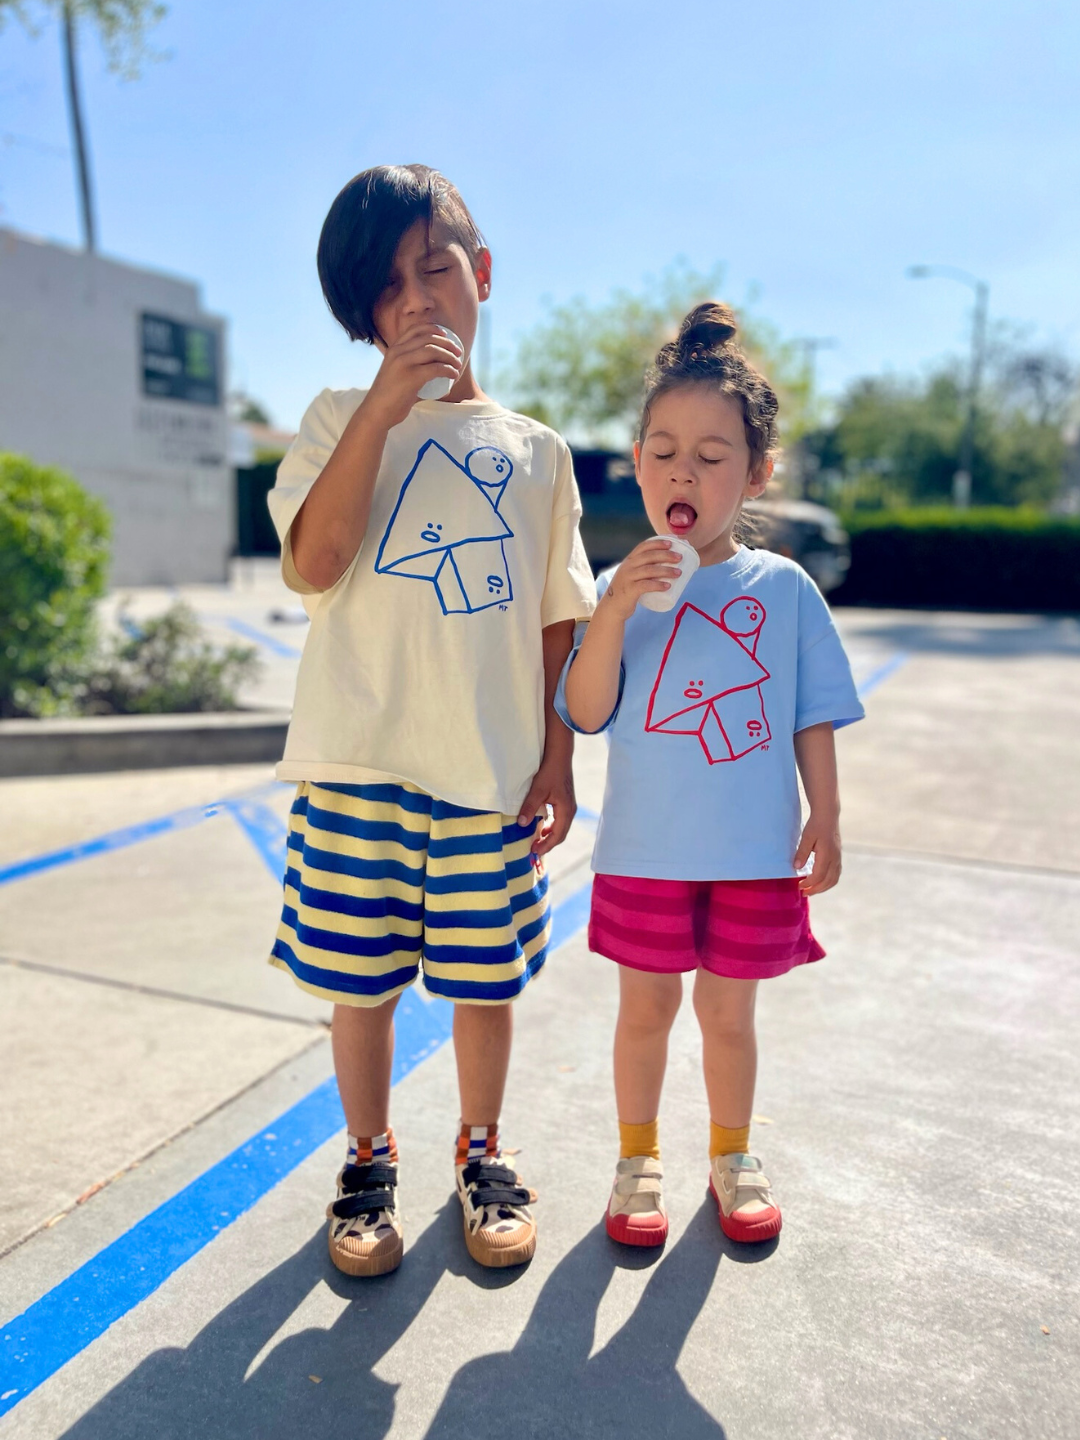 Sky Blue | Two kids wearing the Jumble Tee, one in sky blue with red shapes outline with funny faces in the center, and one in the cream shirt with the same design in blue. The kids are wearing striped shirts and eating ice creams, standing in a parking lot with blue lines on the ground, and blue sky behind.